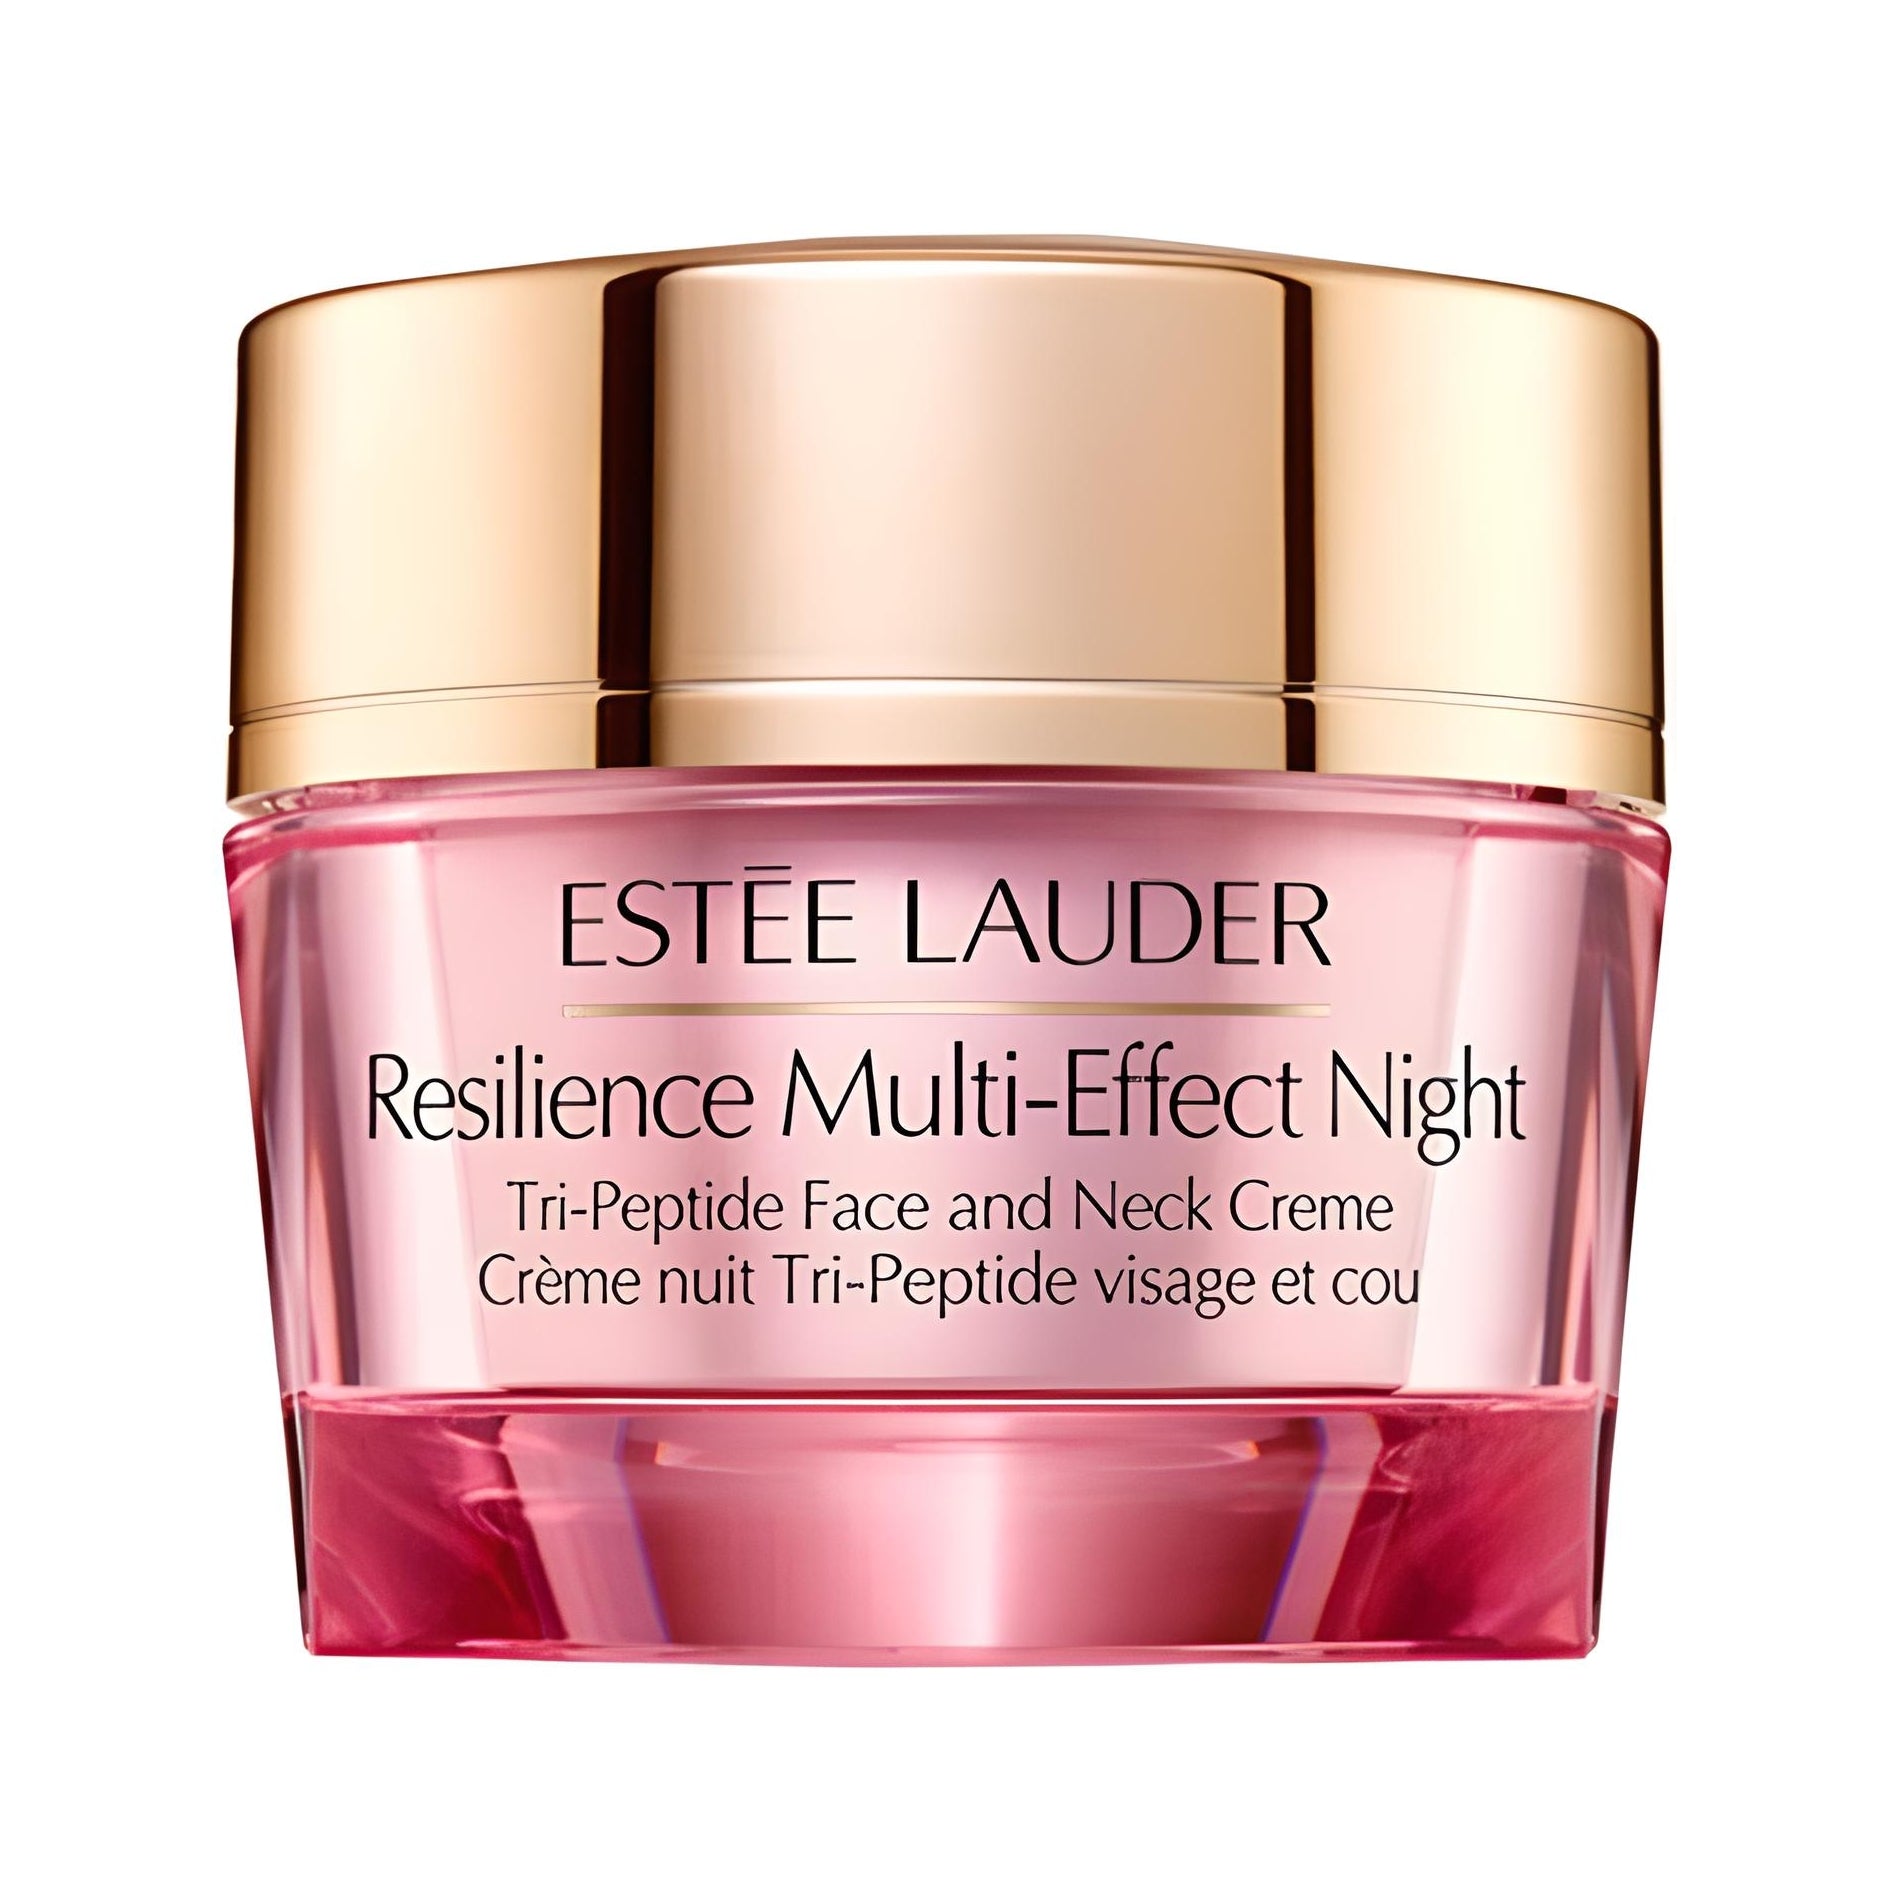 RESILIENCE MULTI-EFFECT NIGHT face&neck creme